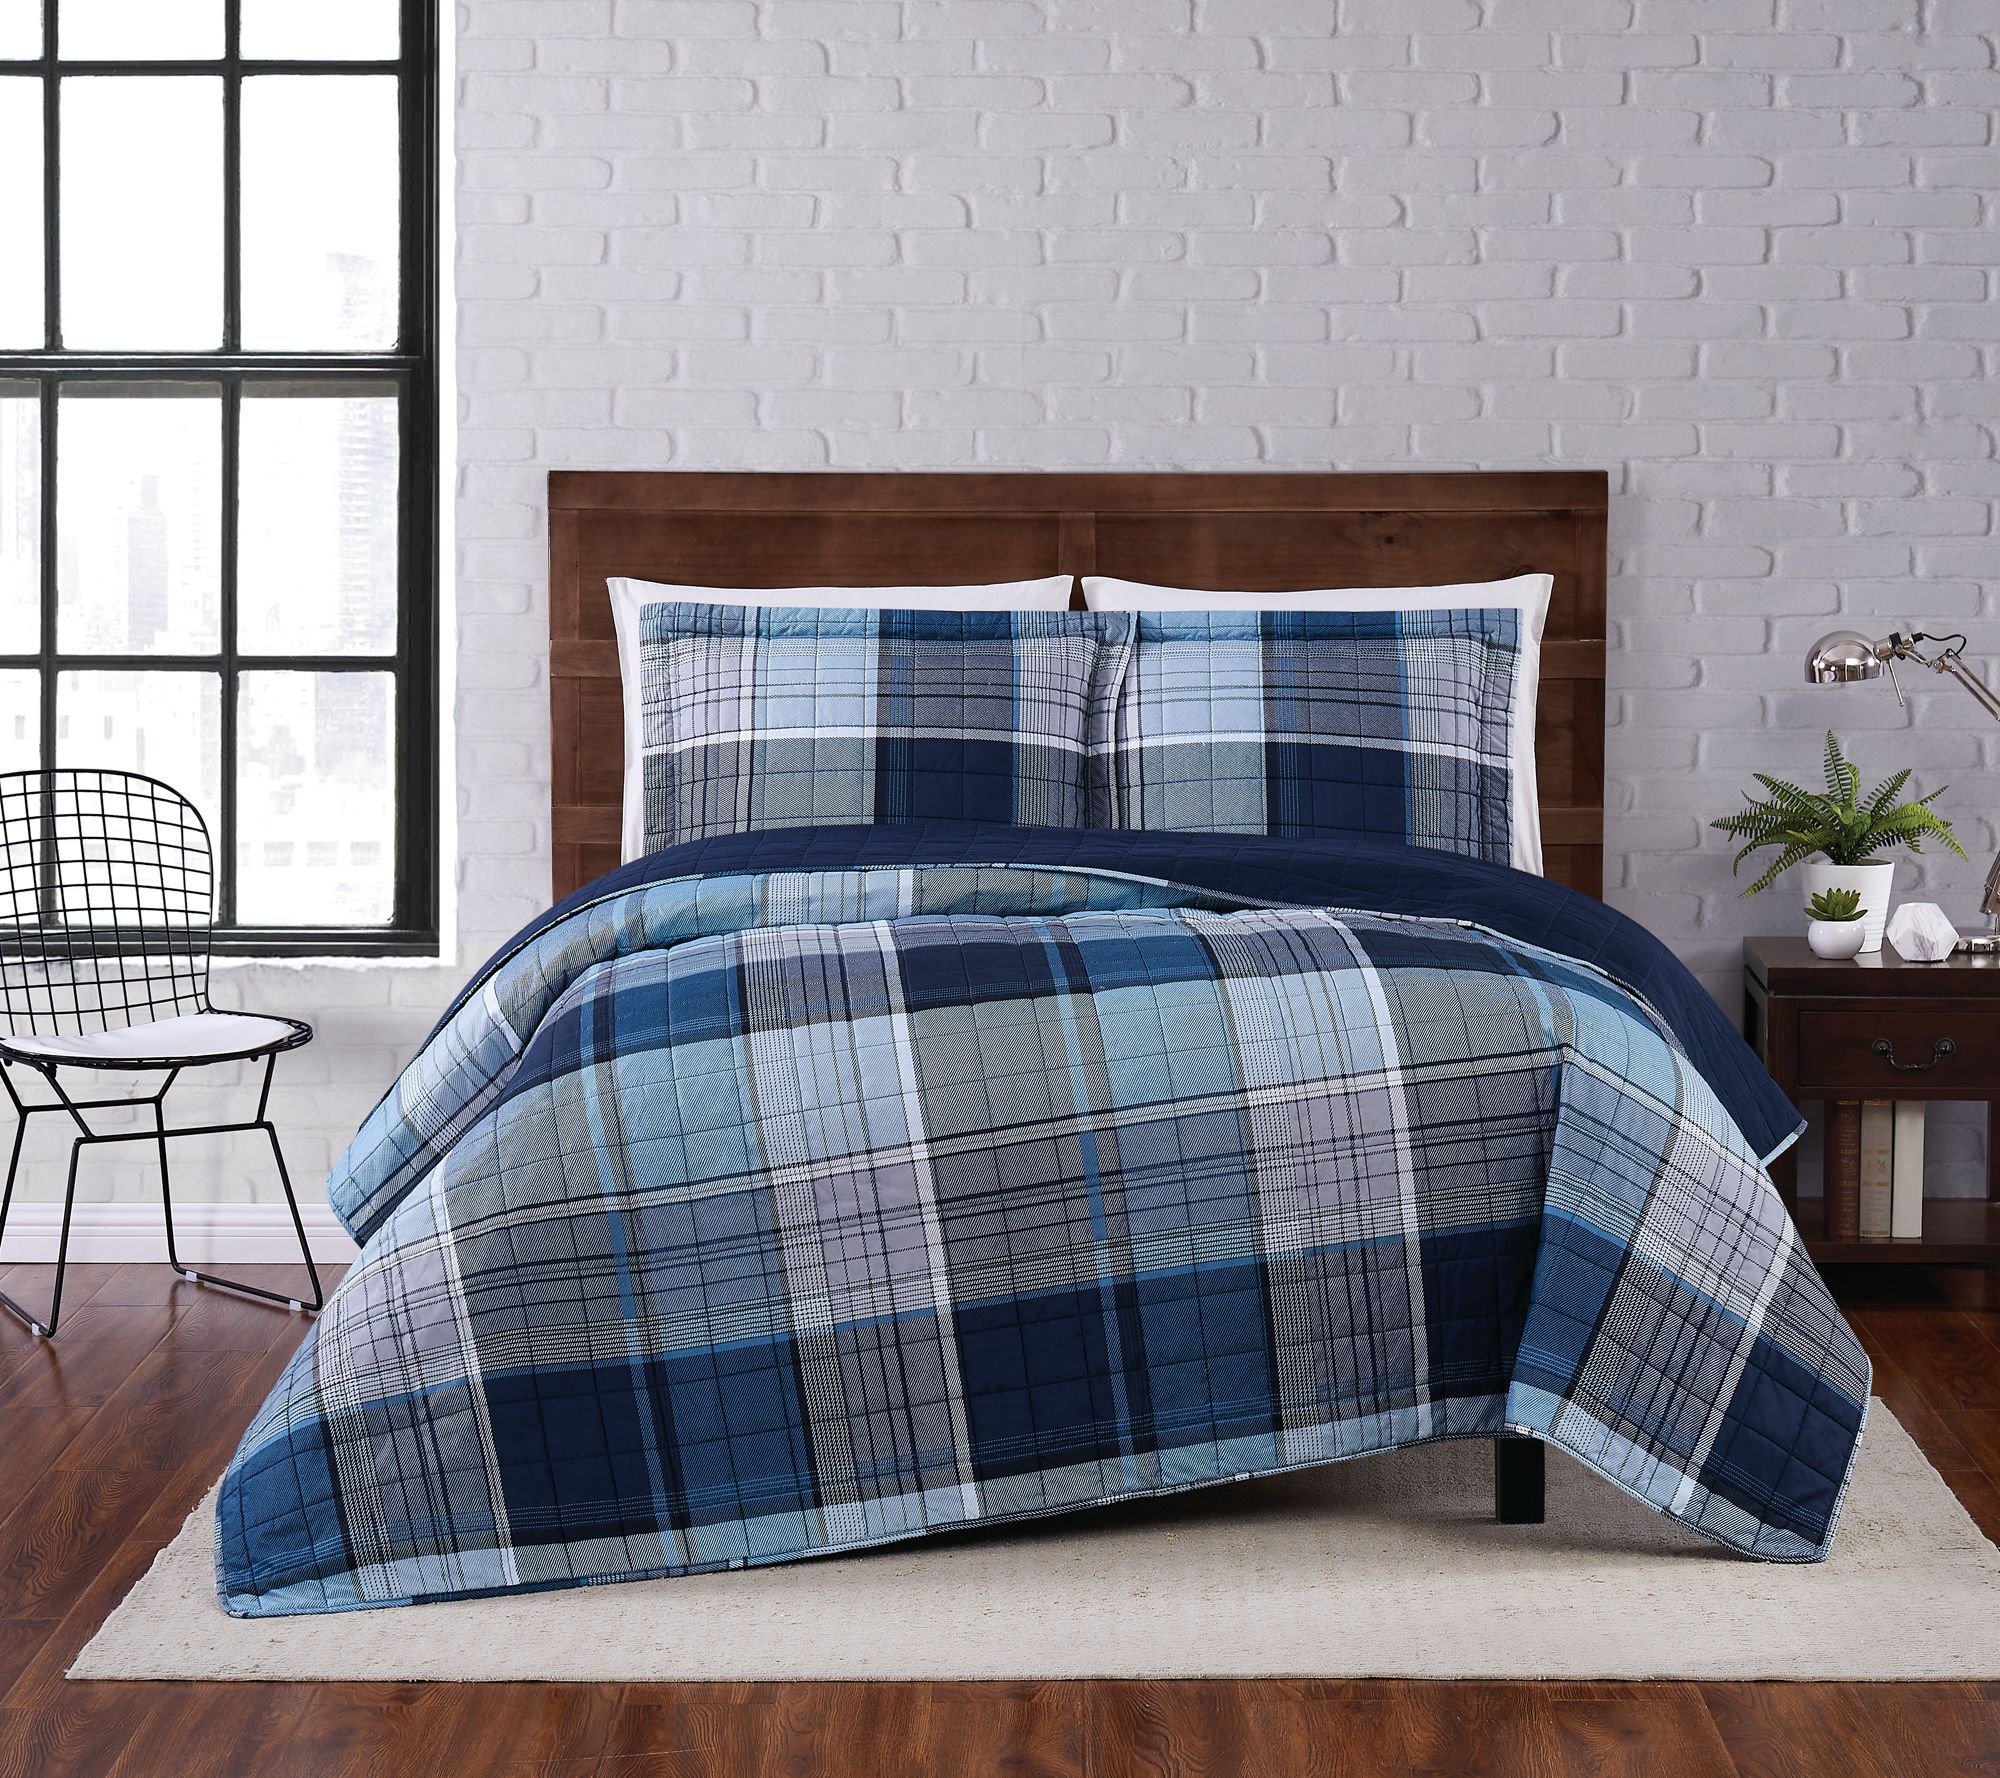 Duvet Cover 2 Person Bed Set, 4 Piece Microfiber Plain Pattern Plaid Bedding  Set With 2 Pillowcases And 1 Bed Sheet (220x240cm, Blue Gray)